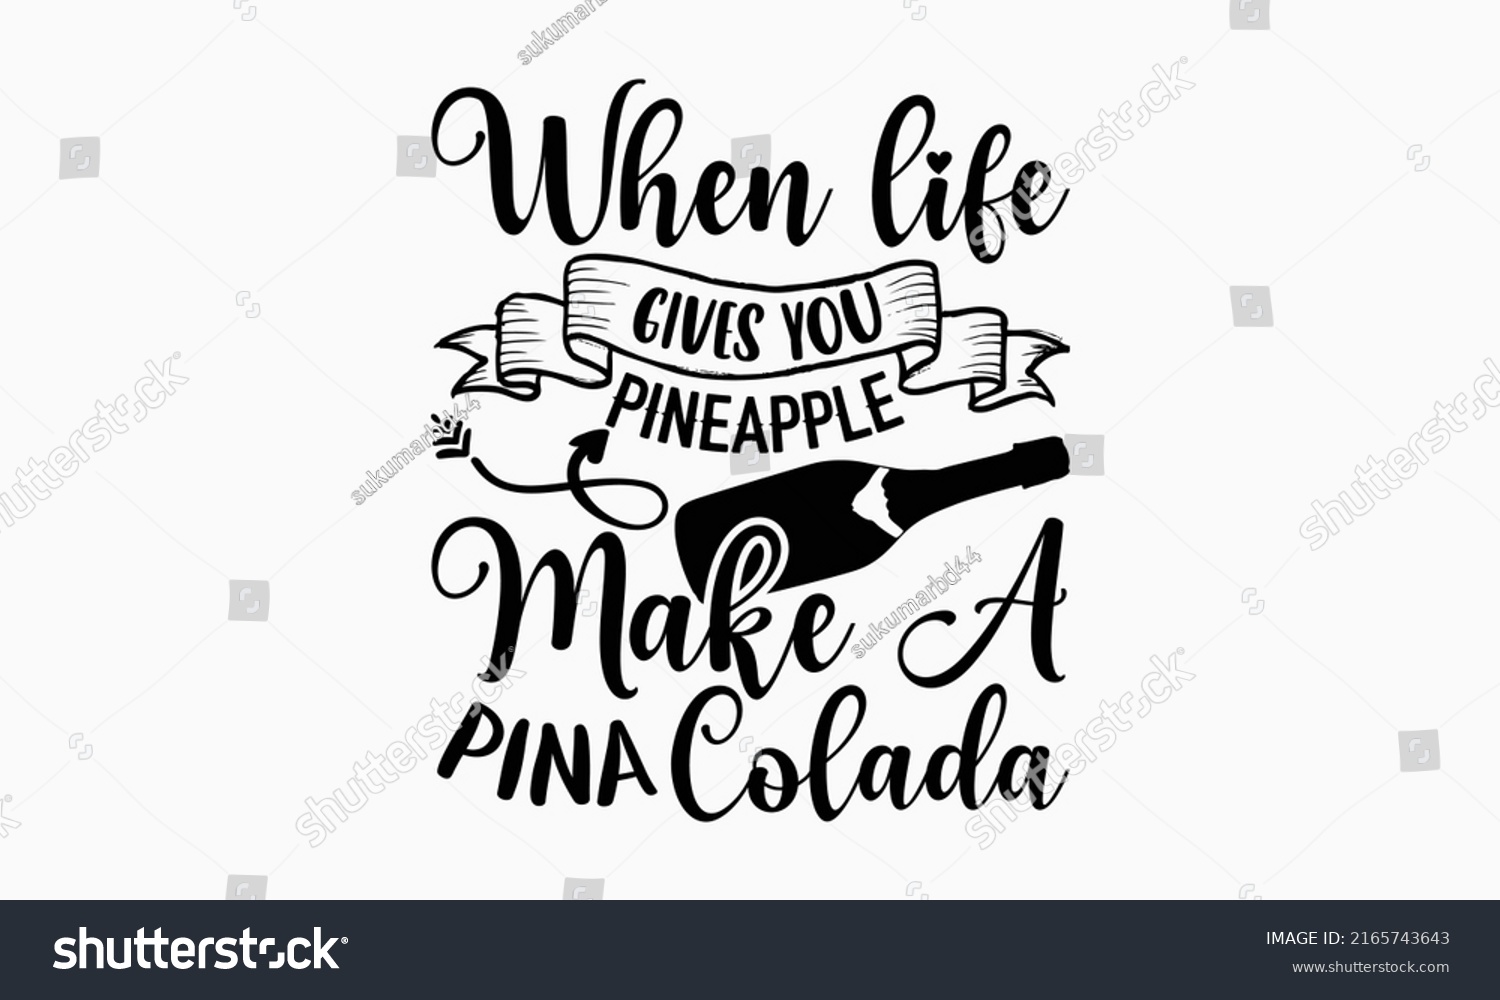 SVG of When life gives you pineapple make a pina colada - Alcohol t shirt design, Hand drawn lettering phrase, Calligraphy graphic design, SVG Files for Cutting Cricut and Silhouette svg